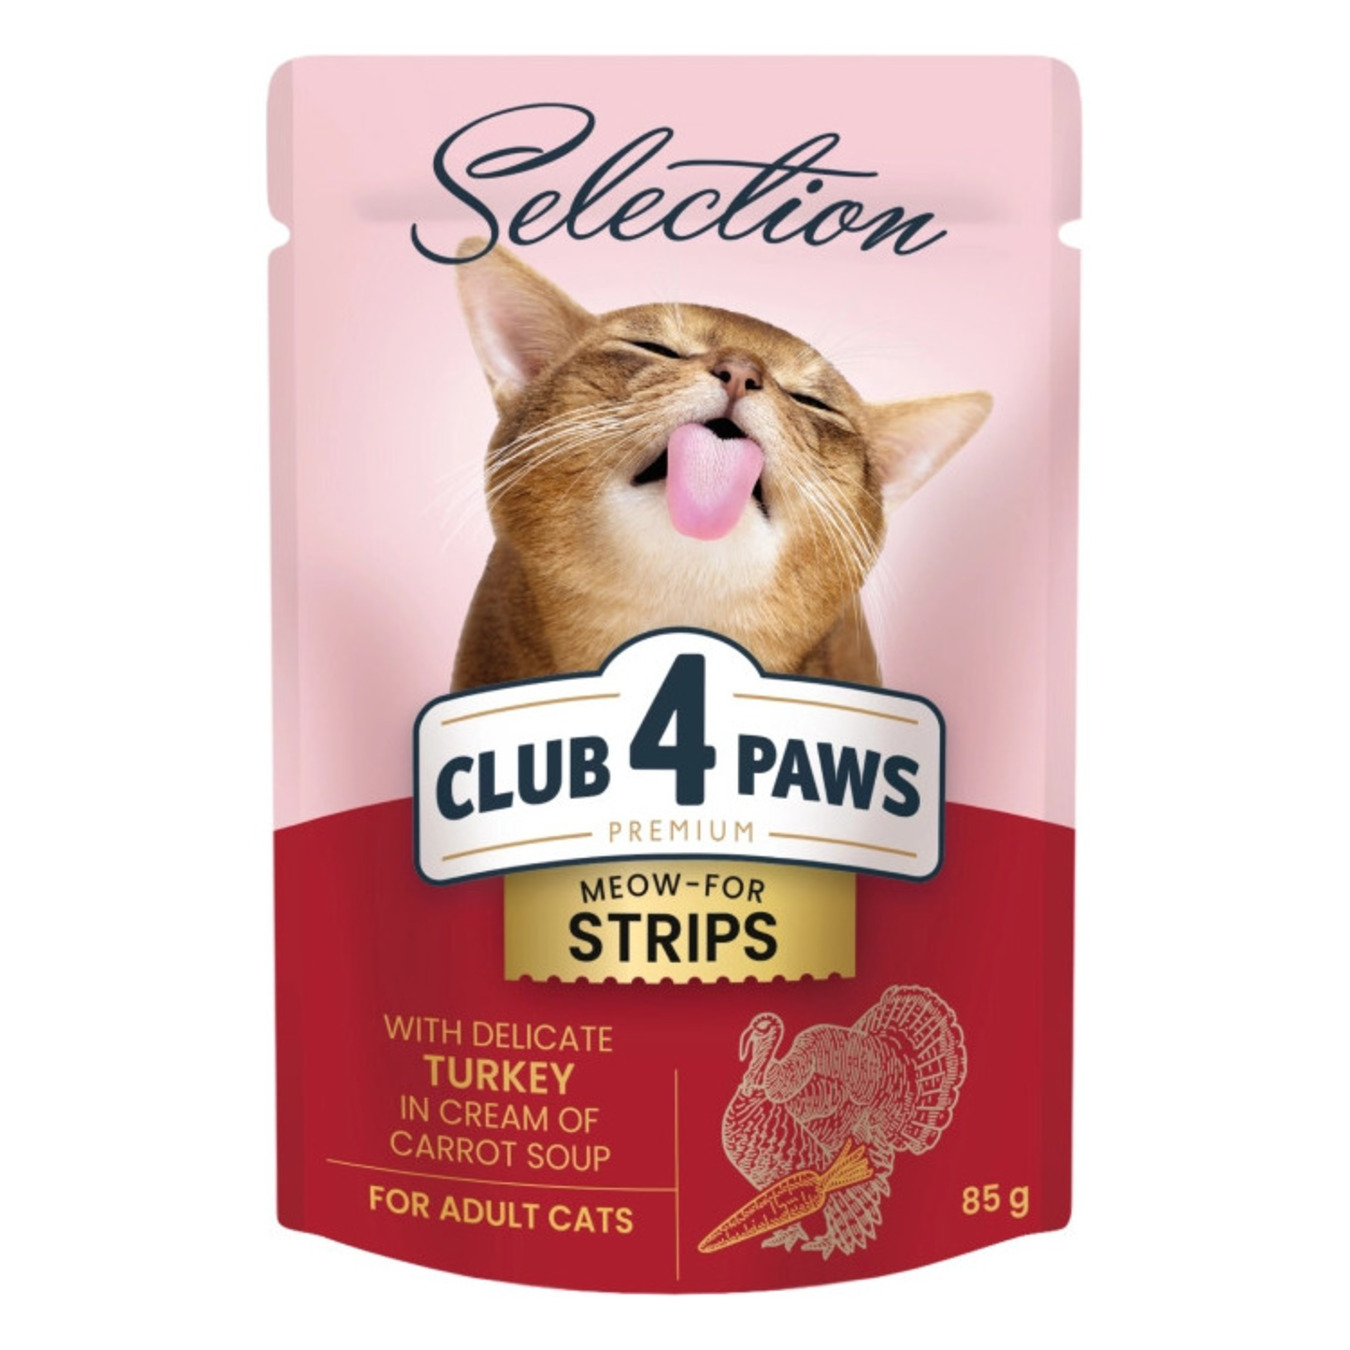 Club 4 Paws Premium food for adult cats strips with turkey in carrot cream soup full ration canned 85g